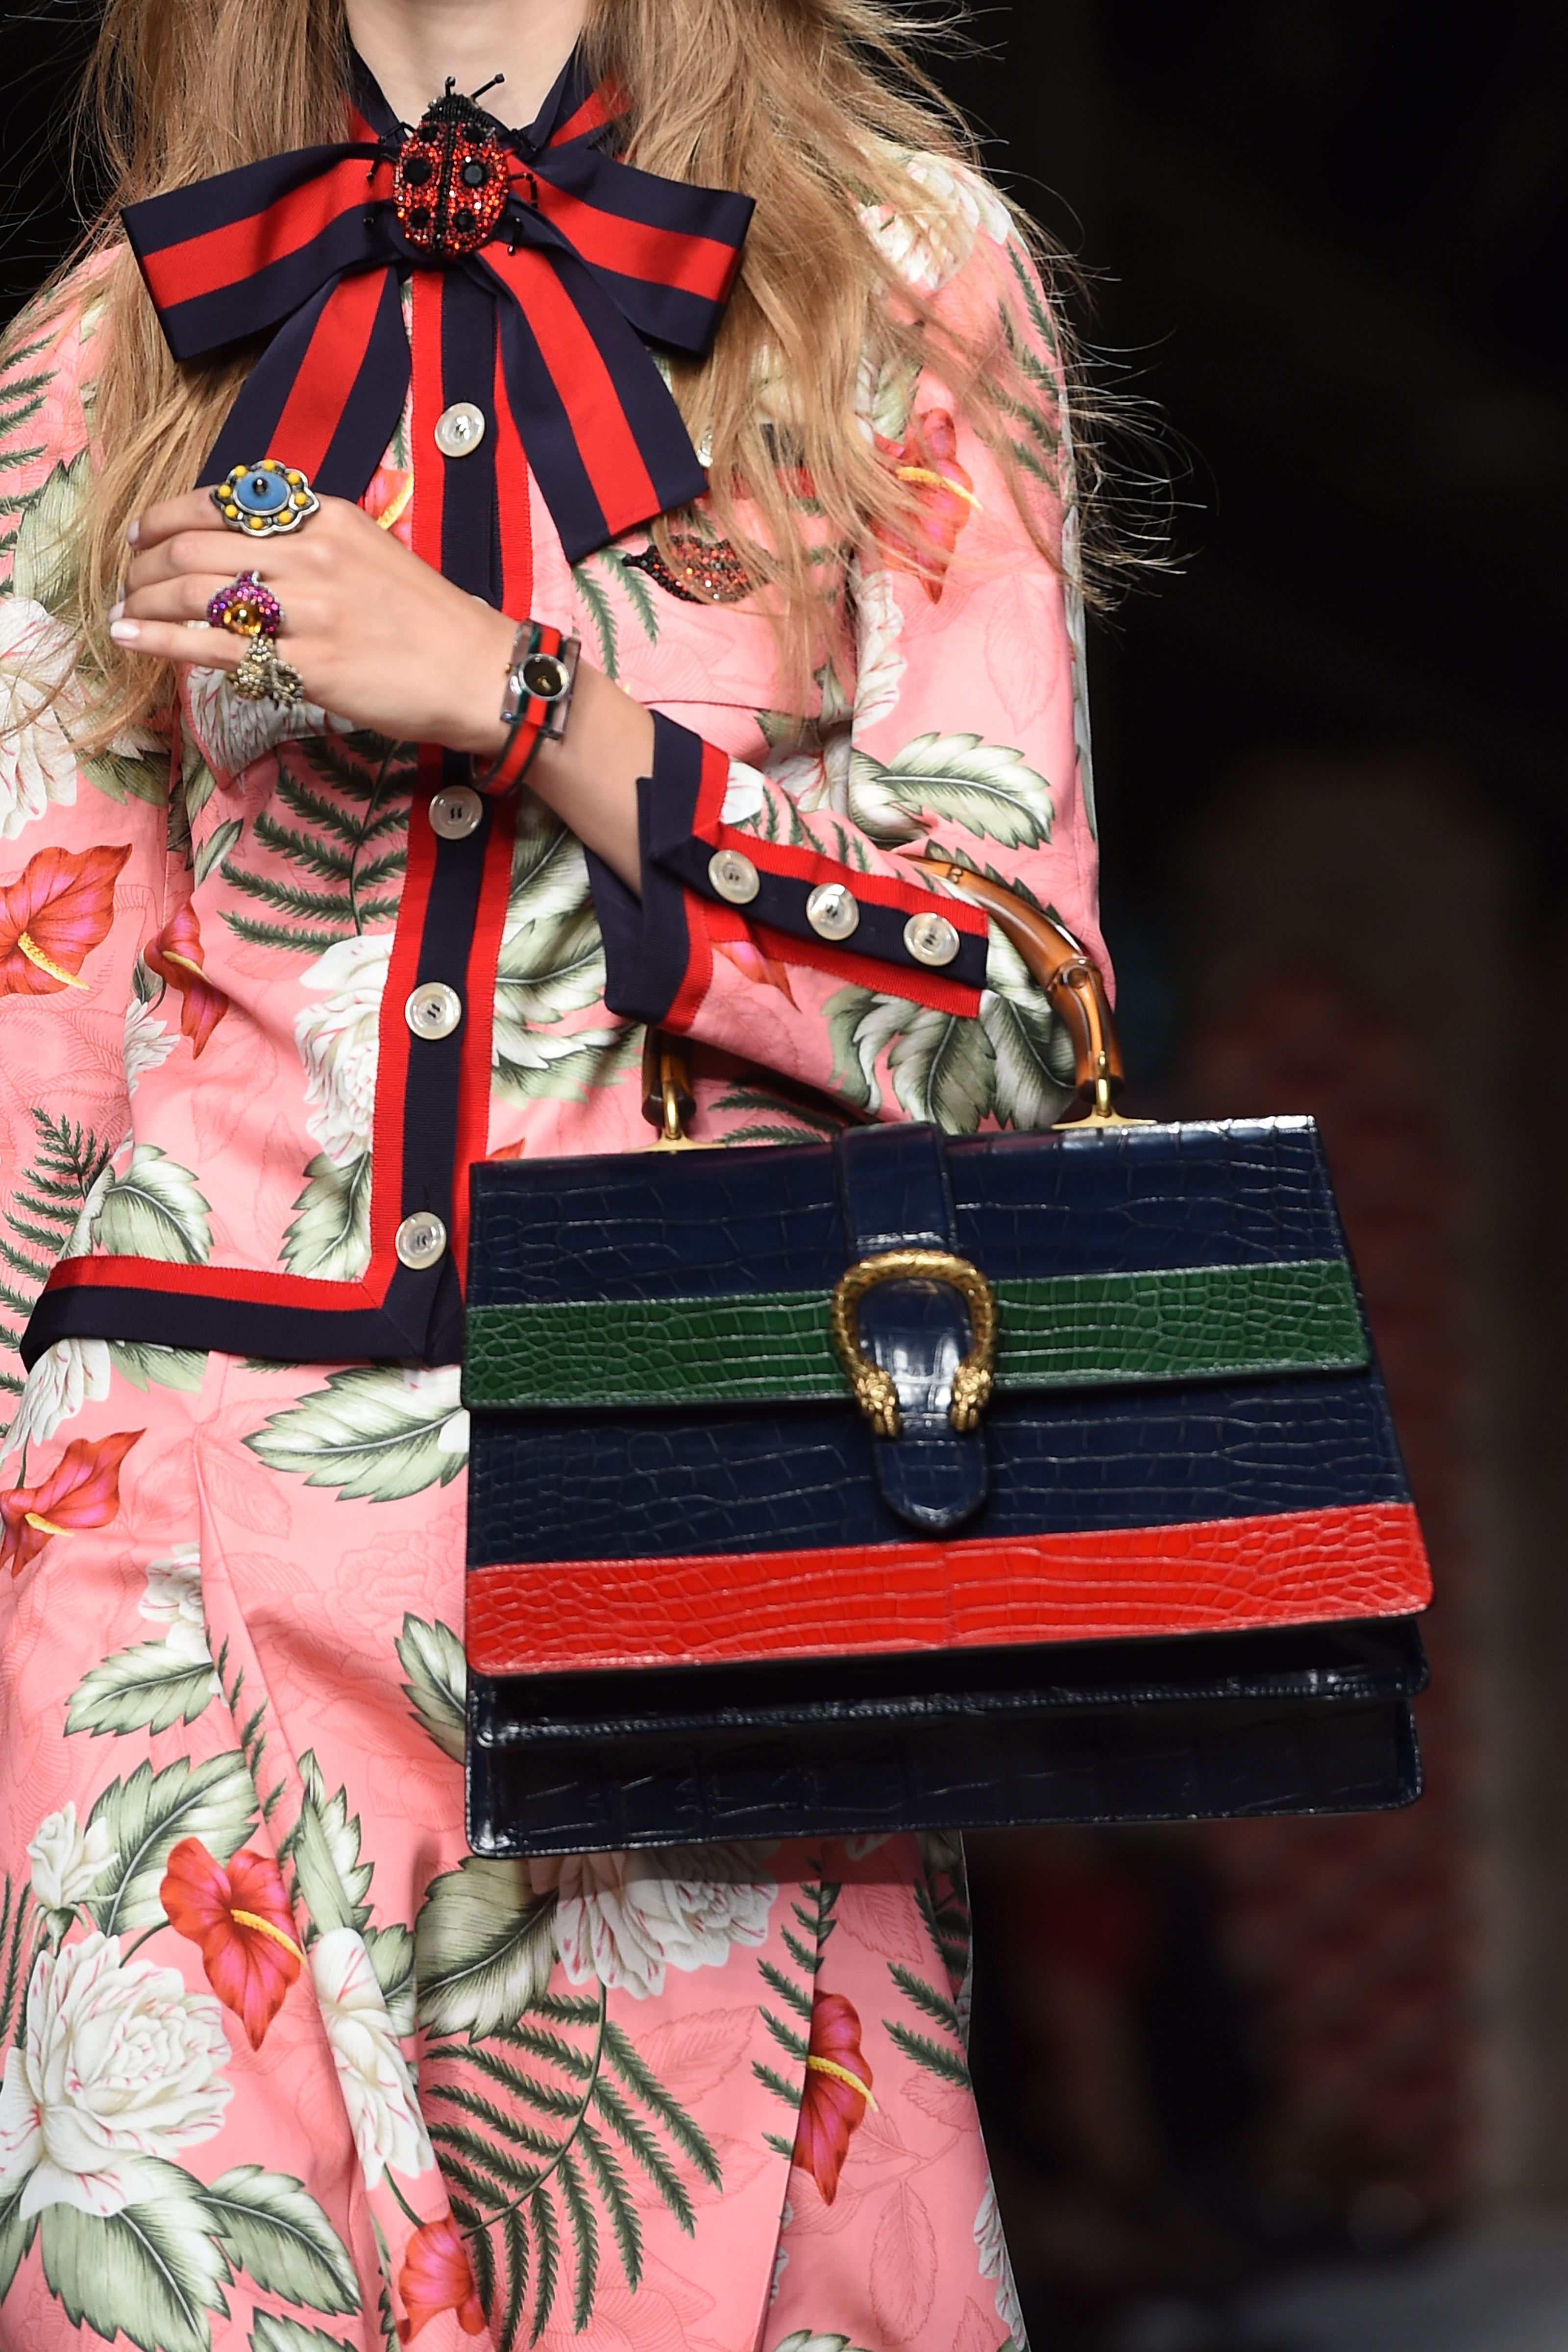 It's Time to Buy Very Vintage Gucci